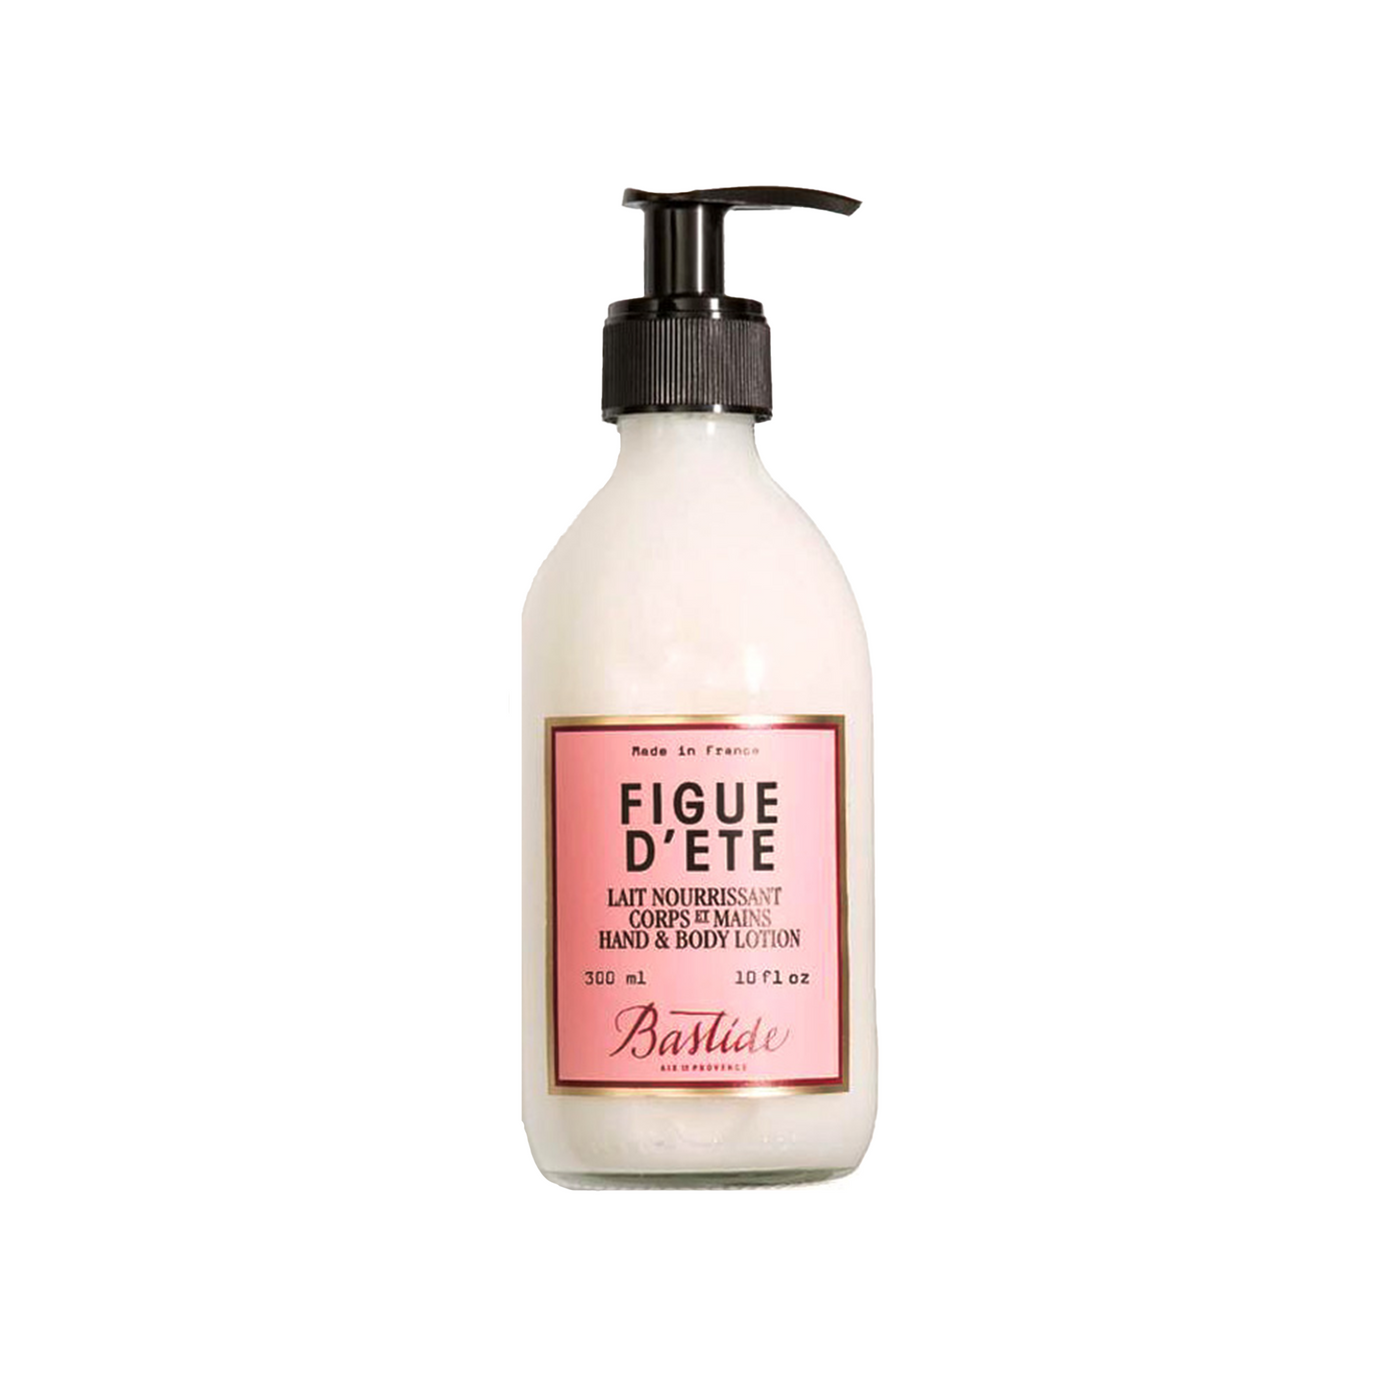 Scented Hand Lotion - Figue d'Ete